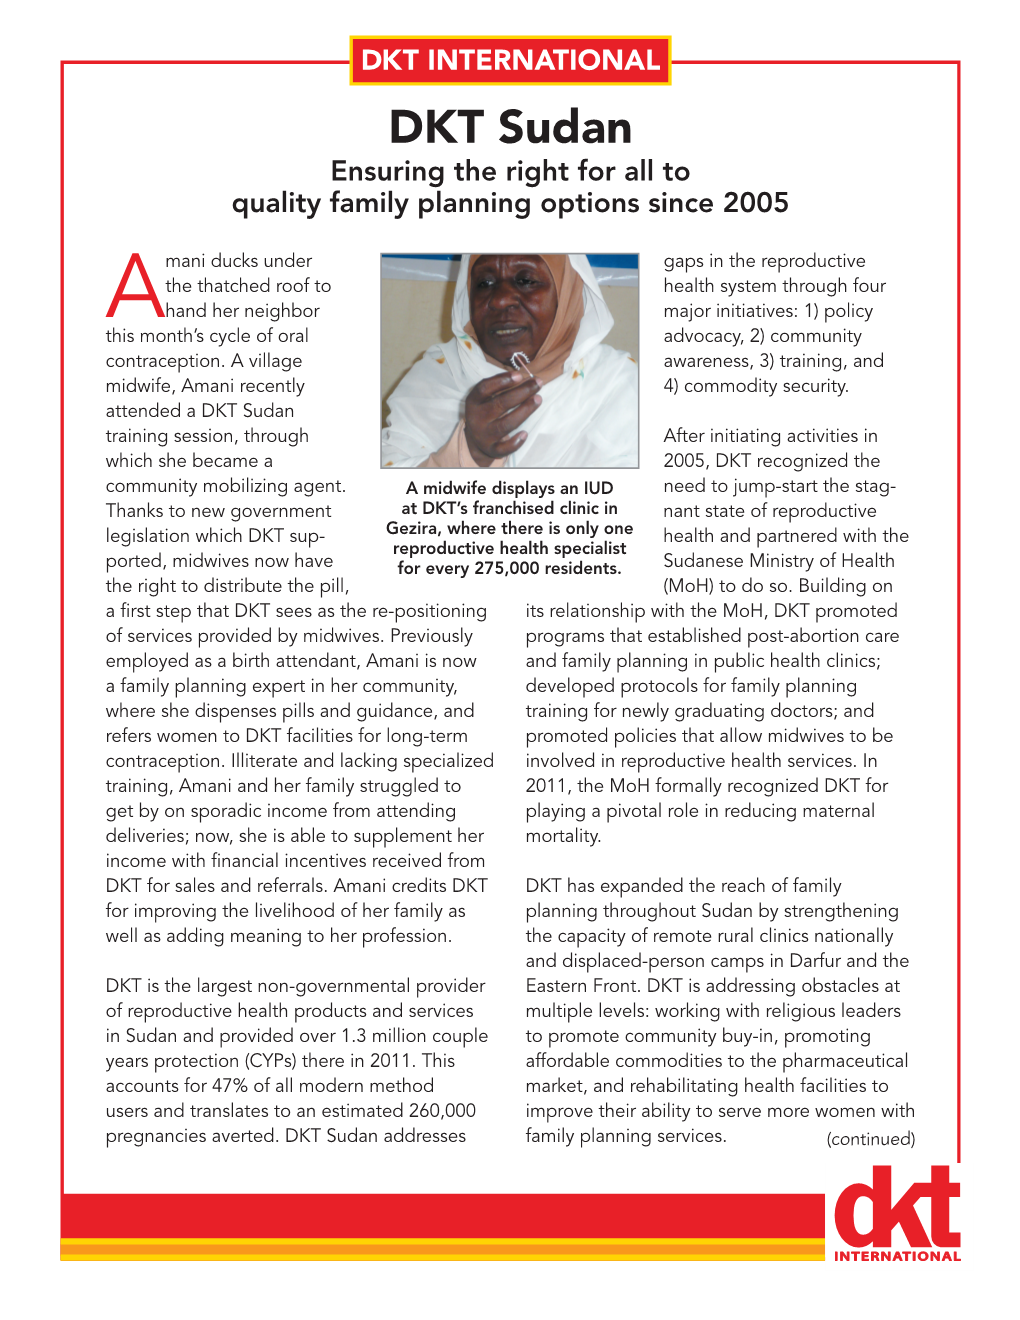 DKT Sudan Ensuring the Right for All to Quality Family Planning Options Since 2005